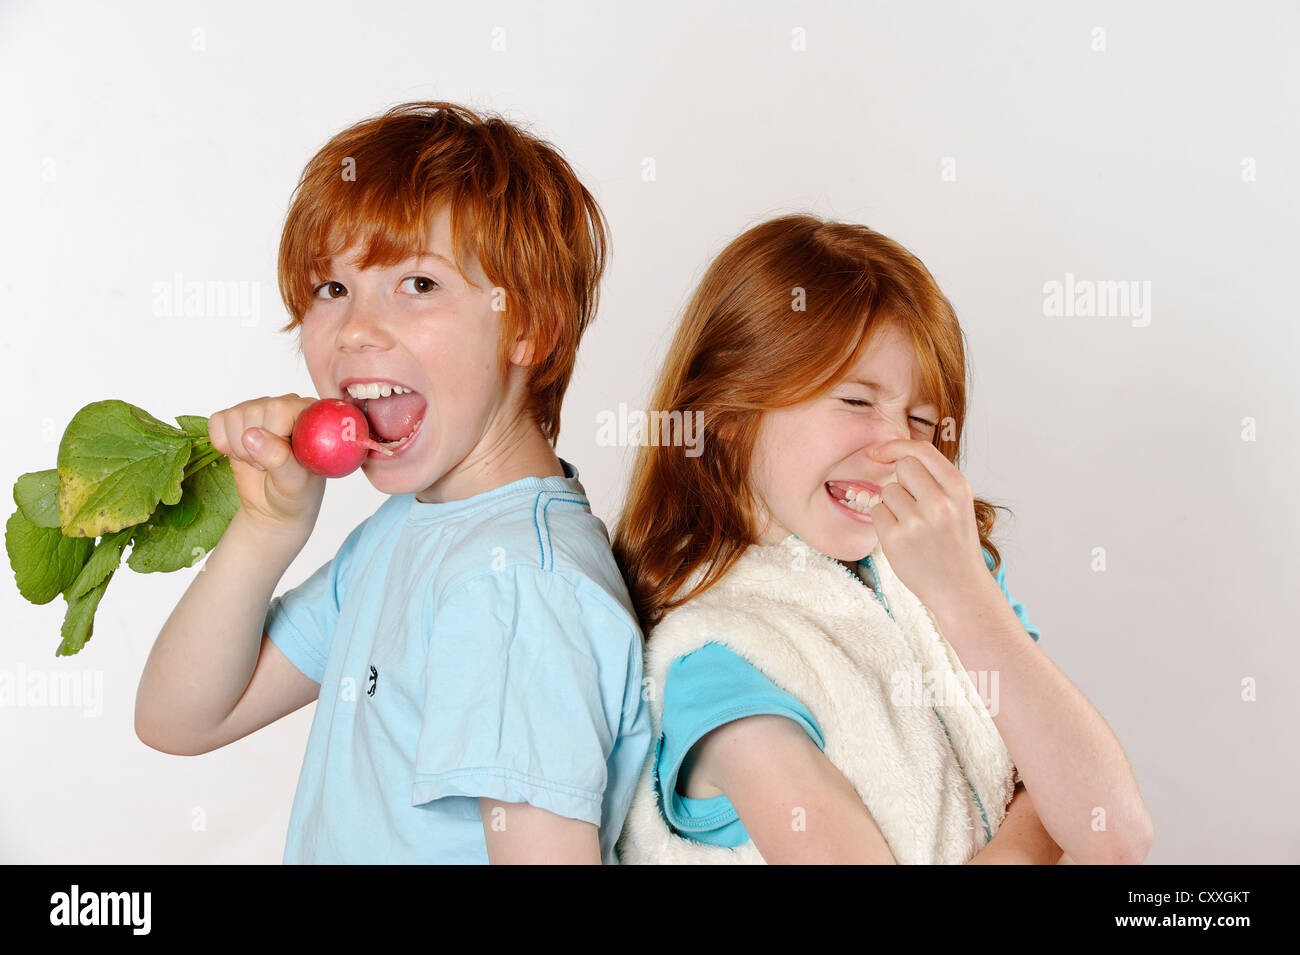 Boy eating radishes, girl rejecting raw food or vegetables Stock Photo